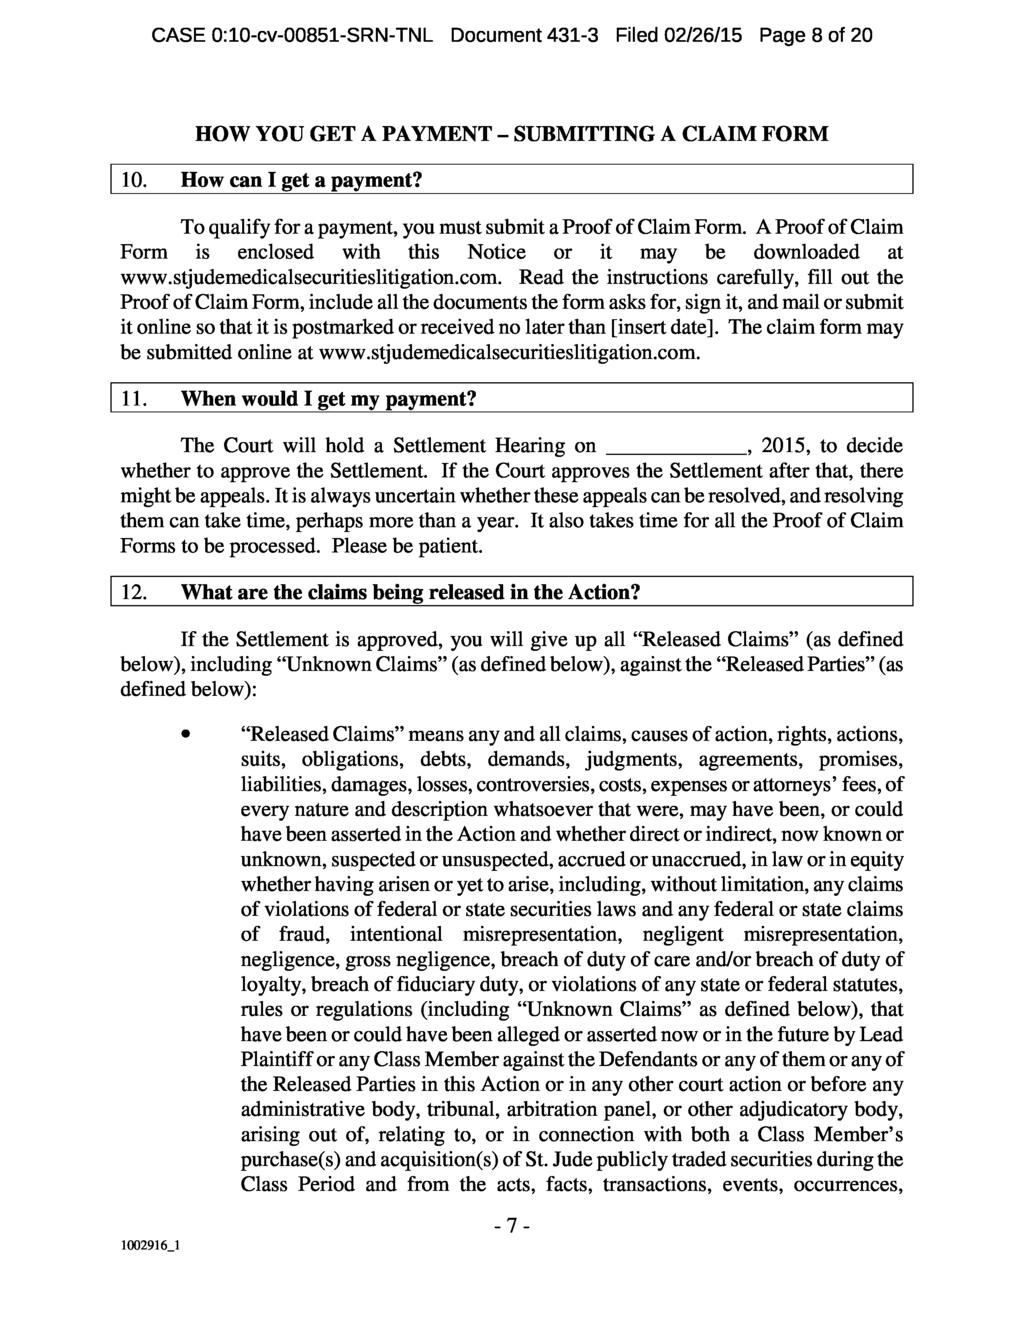 CASE 0:10-cv-00851-SRN-TNL Document 431-3 Filed 02/26/15 Page 8 of 20 HOW YOU GET A PAYMENT SUBMITTING A CLAIM FORM 10. How can I get a payment?